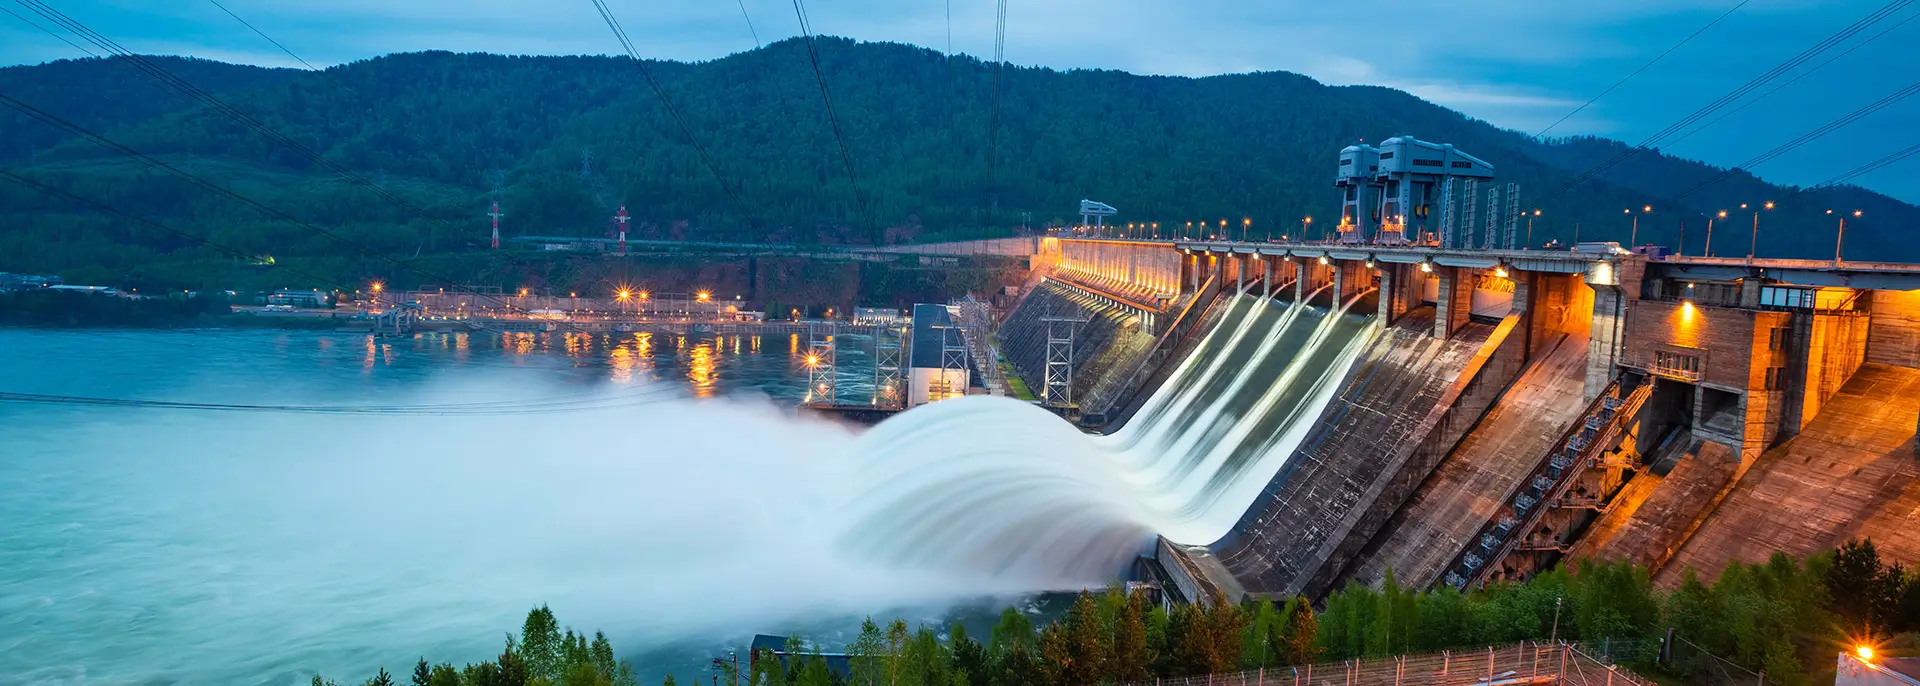 View of a hydroelectric dam